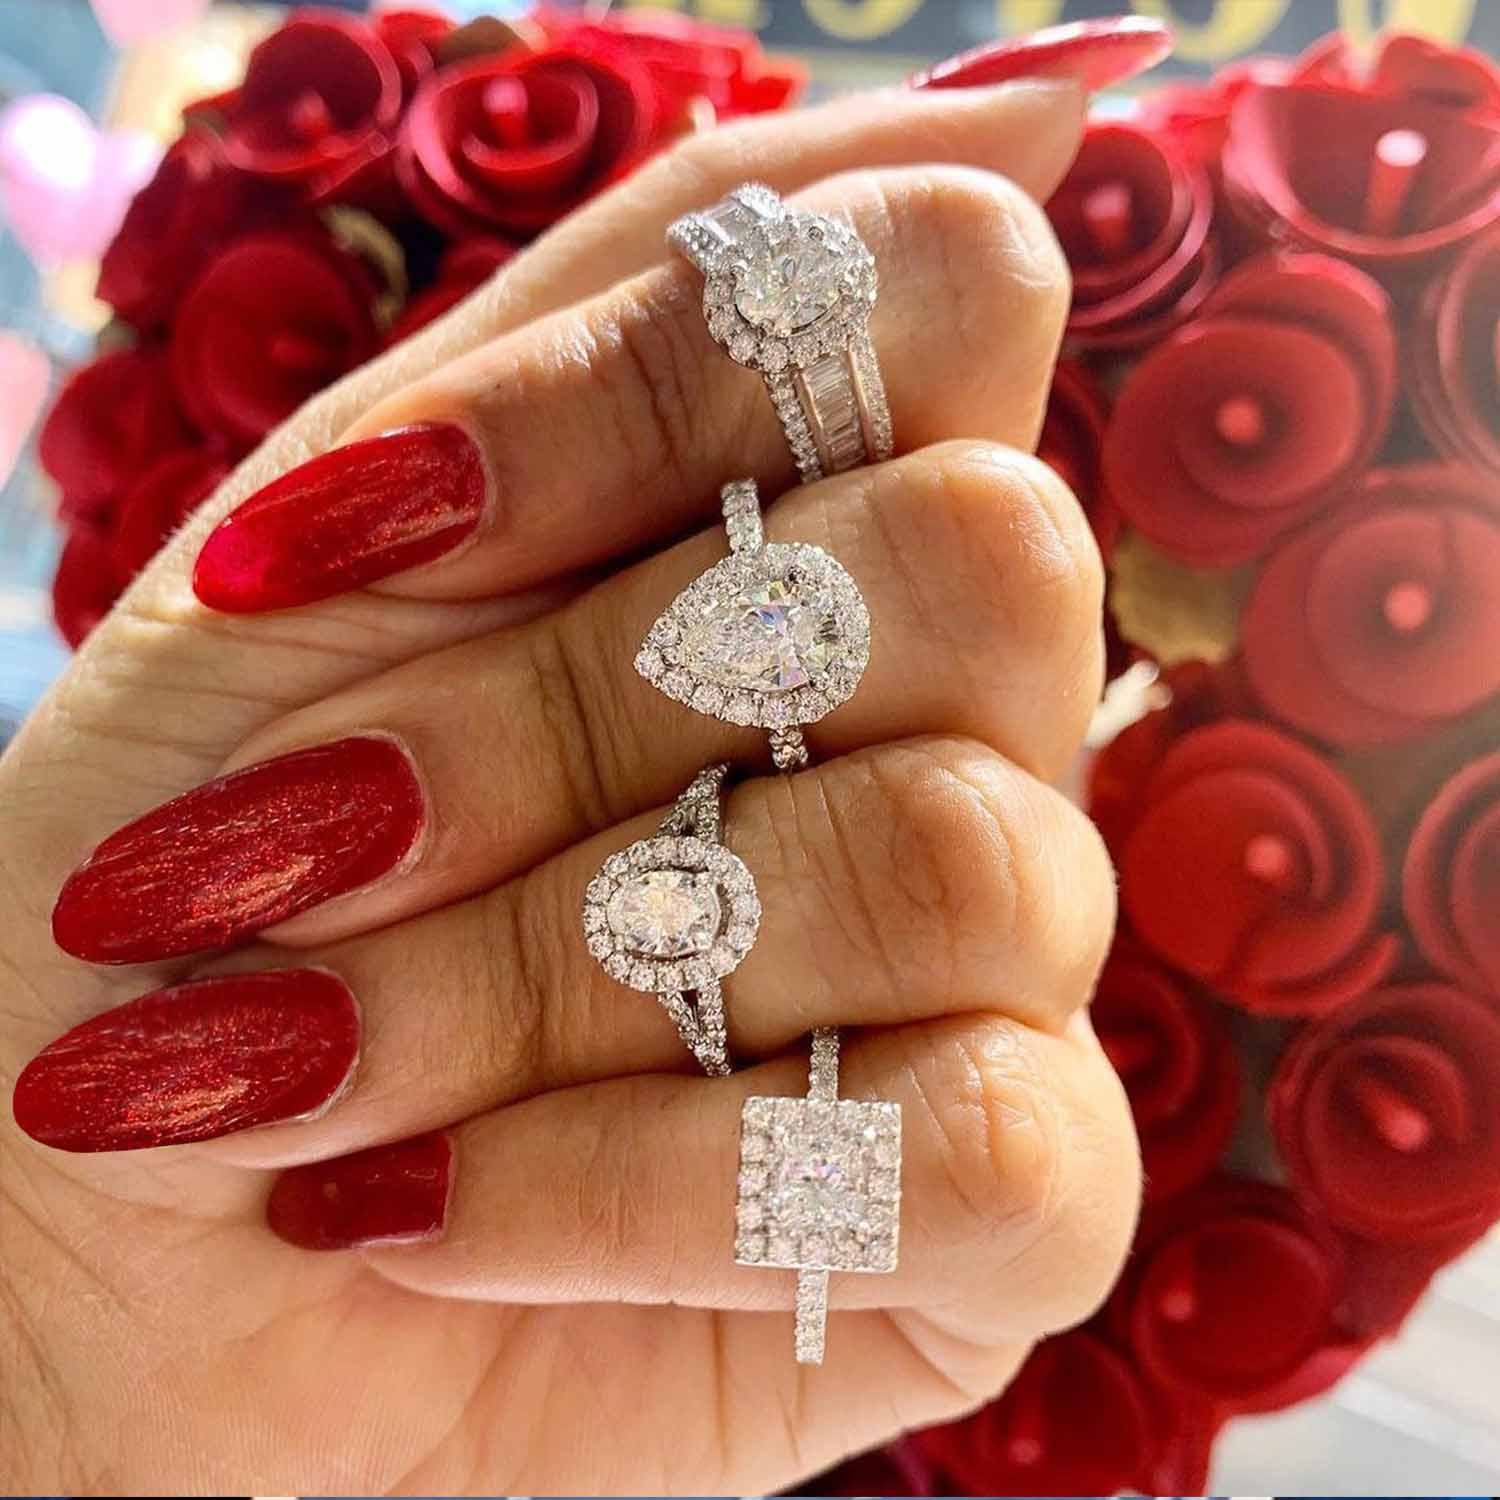 This image shows a woman's hand in front of a heart shaped rose bouquet with 4 different halo rings on her fingers.